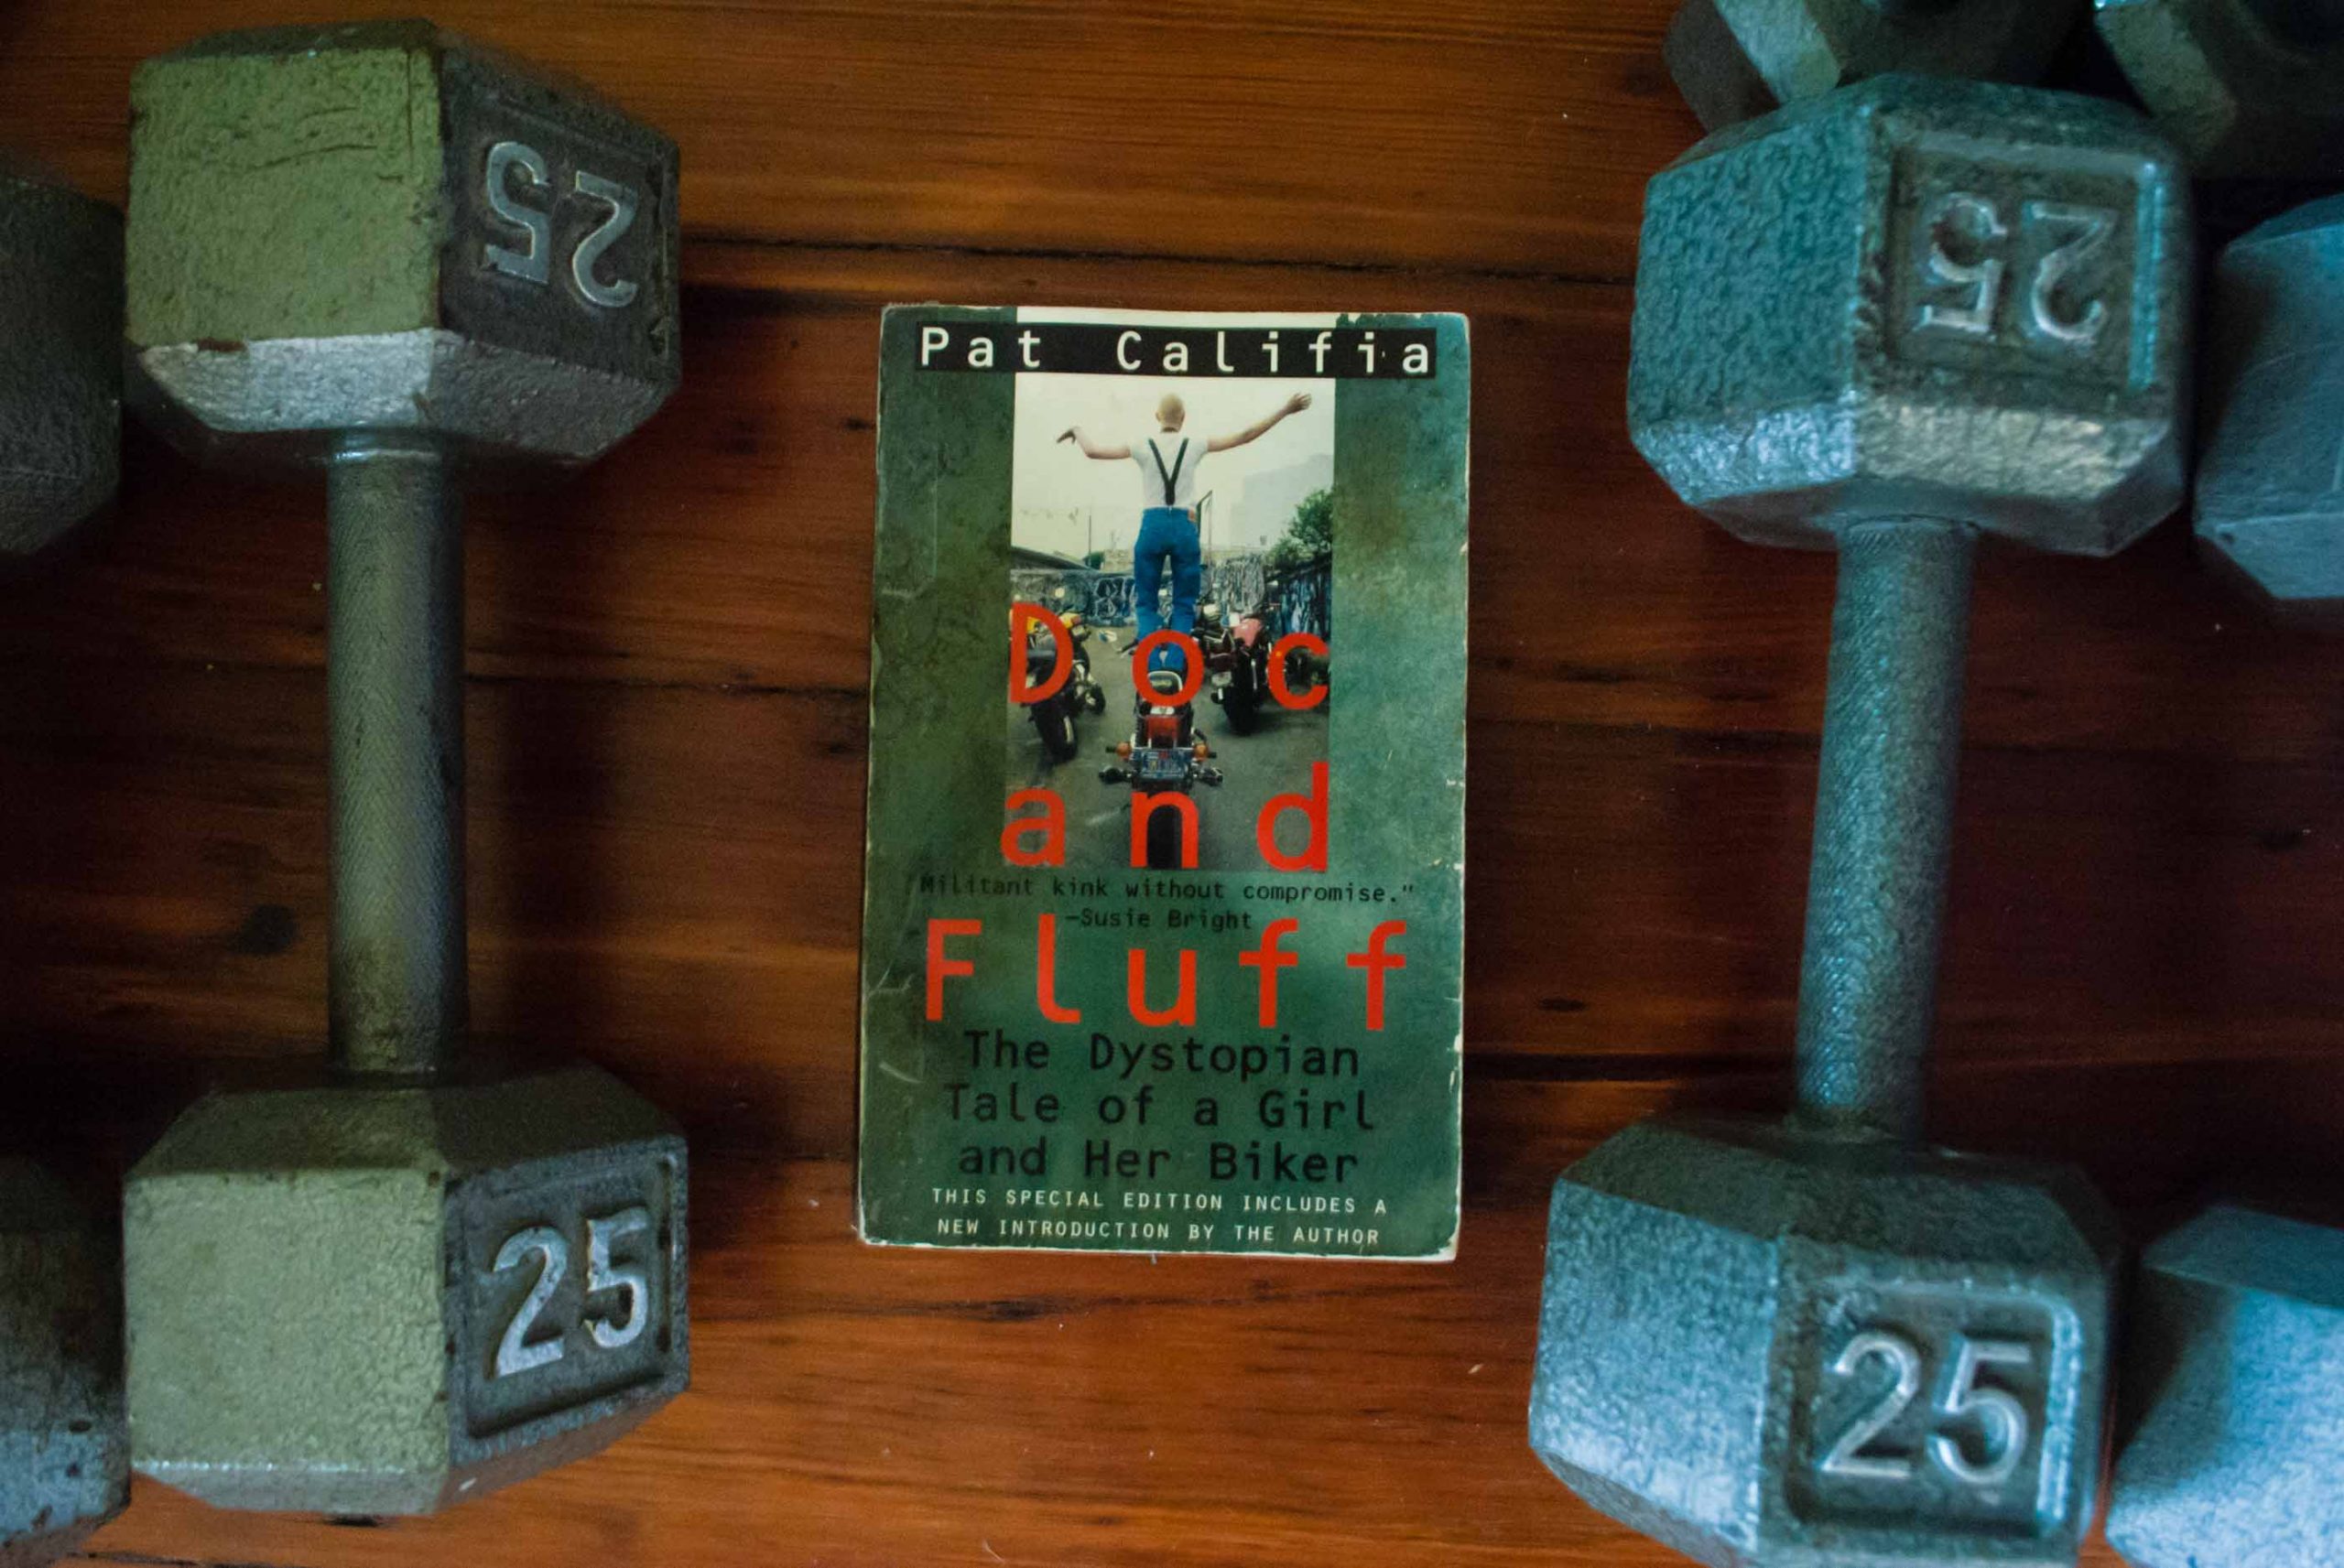 Monk Reviews Doc and Fluff by Patrick Califia